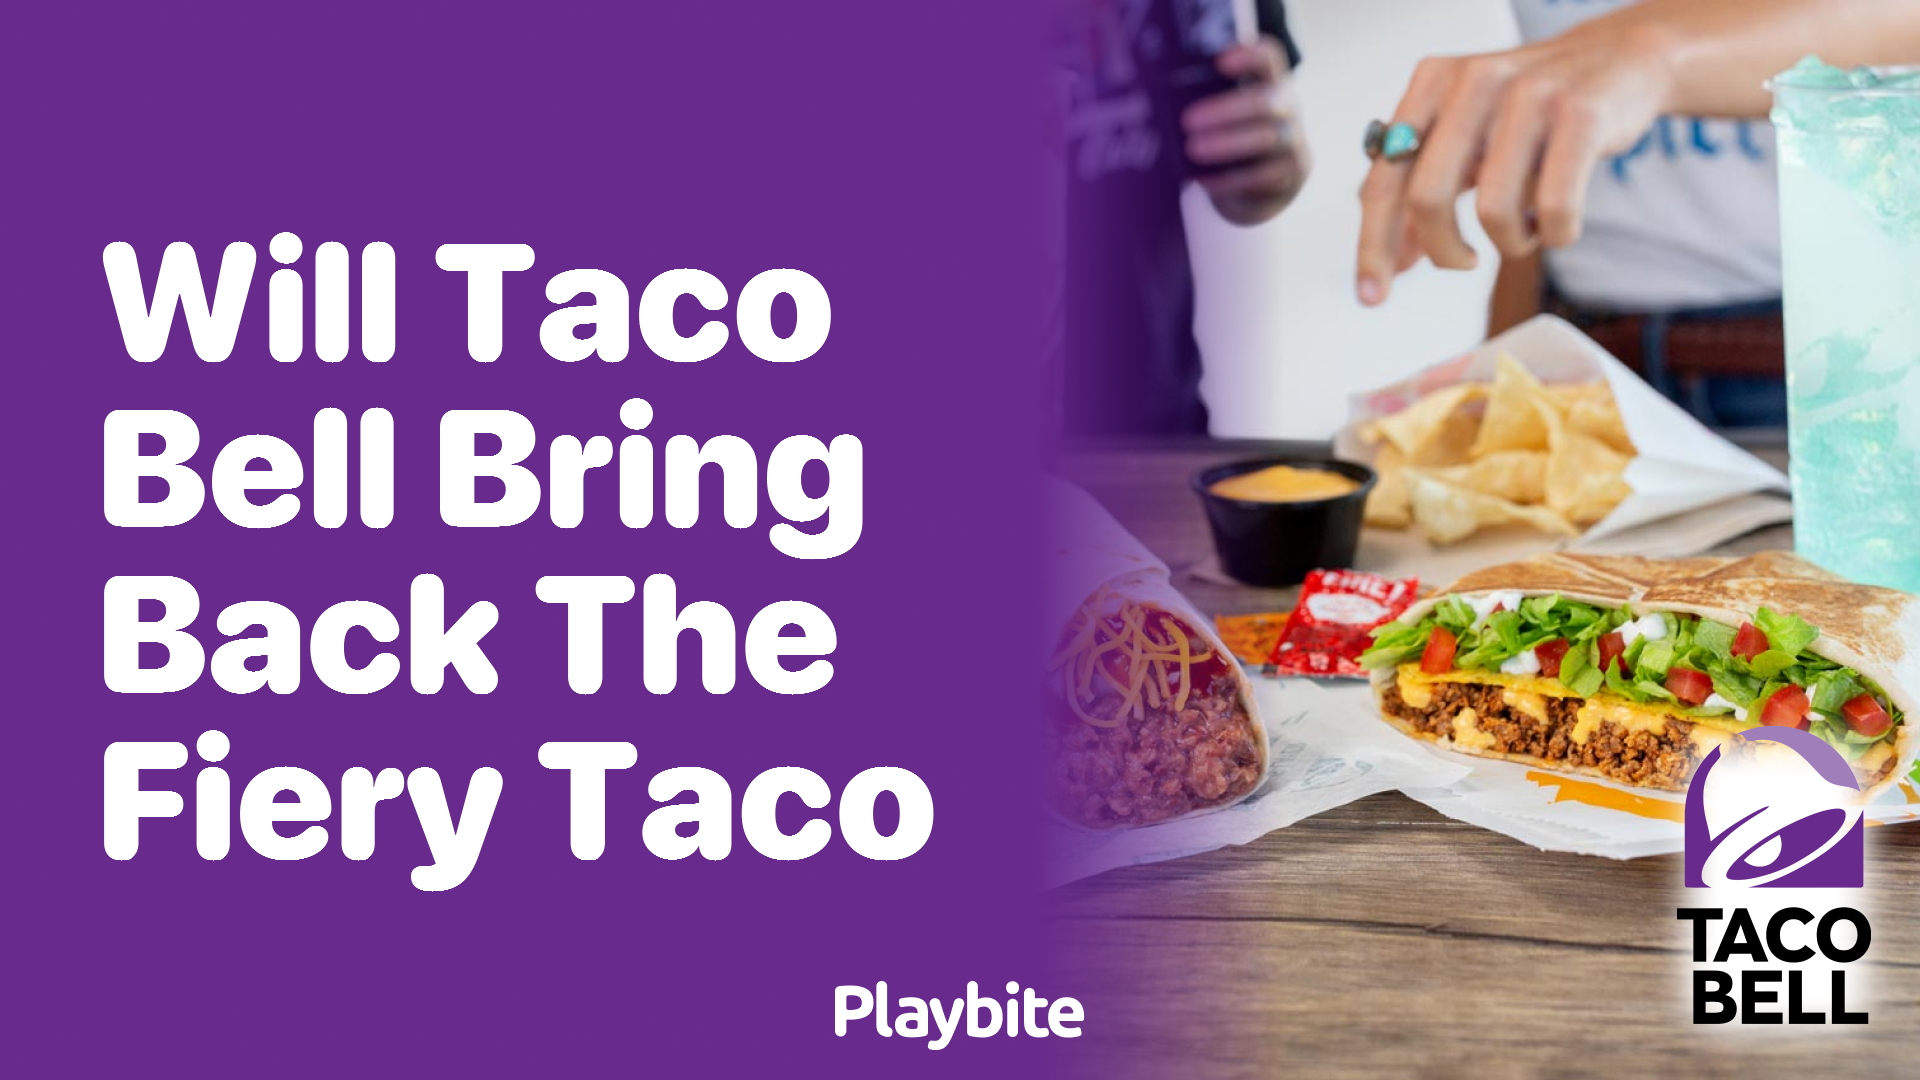 Will Taco Bell Bring Back the Fiery Taco? Here’s What You Need to Know